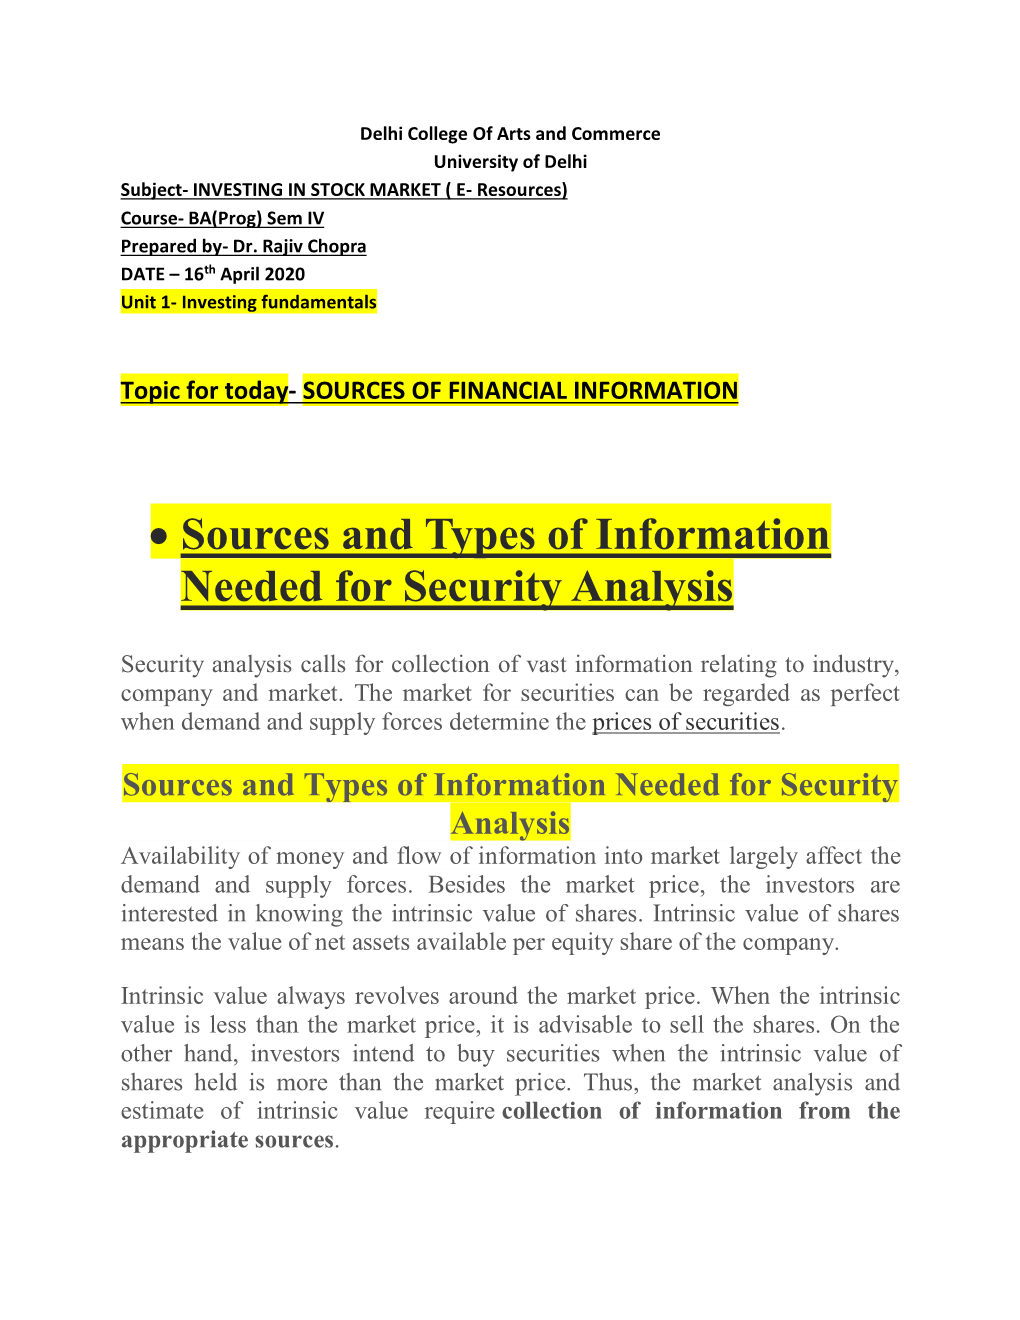 • Sources and Types of Information Needed for Security Analysis